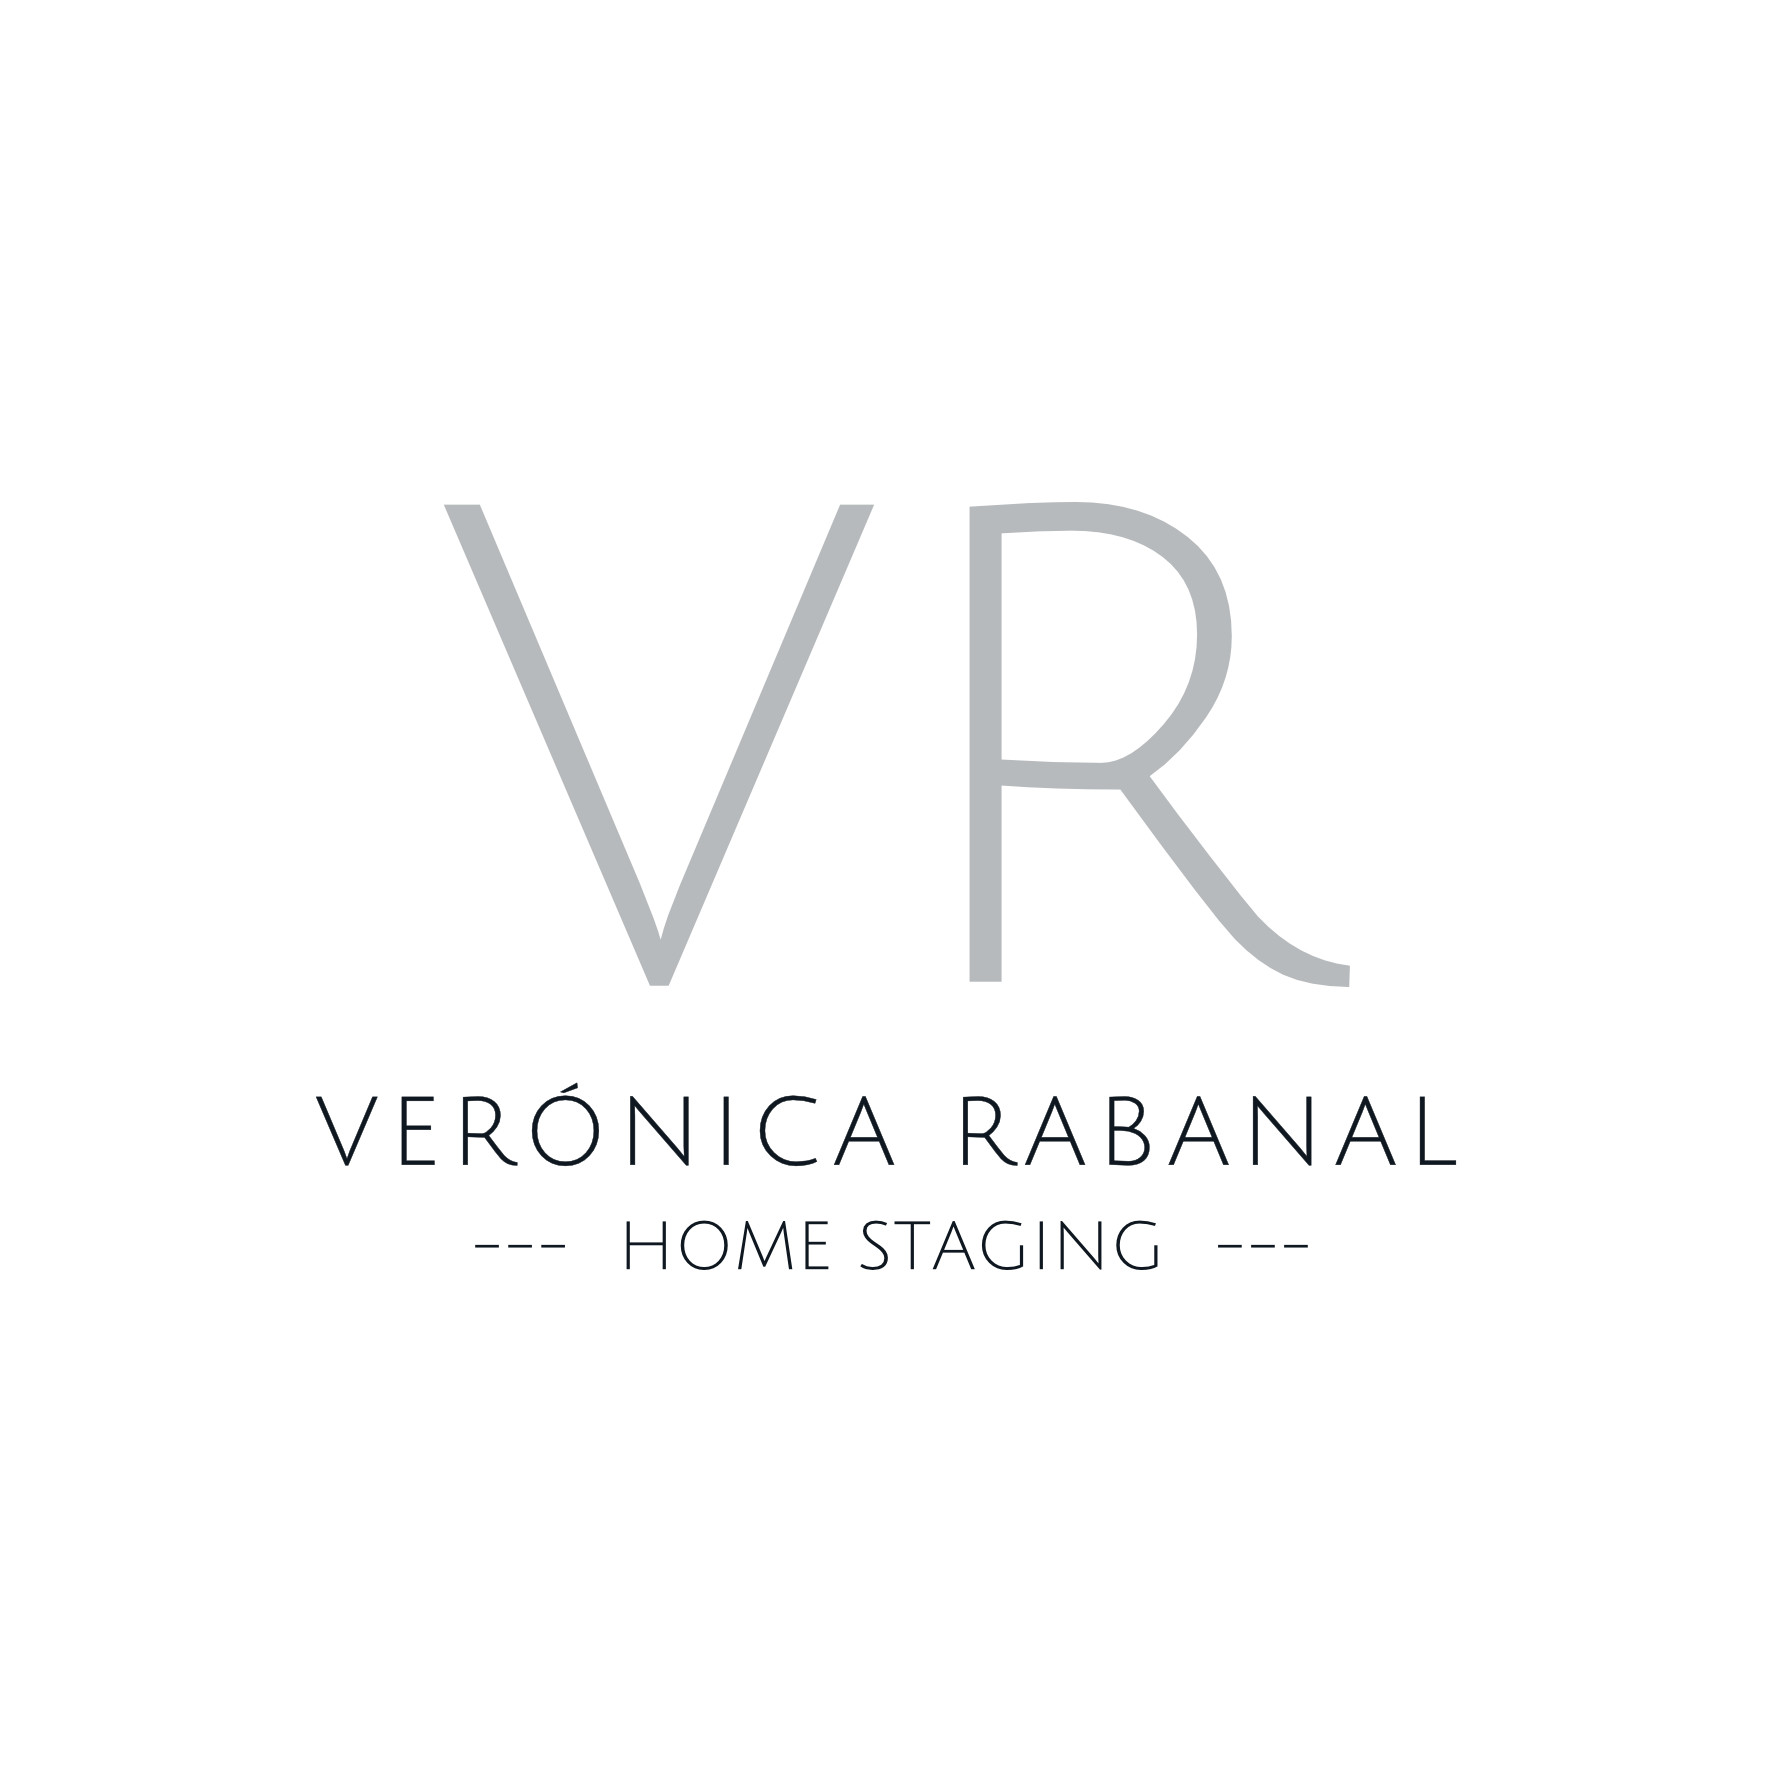 Verónica Rabanal Home Staging